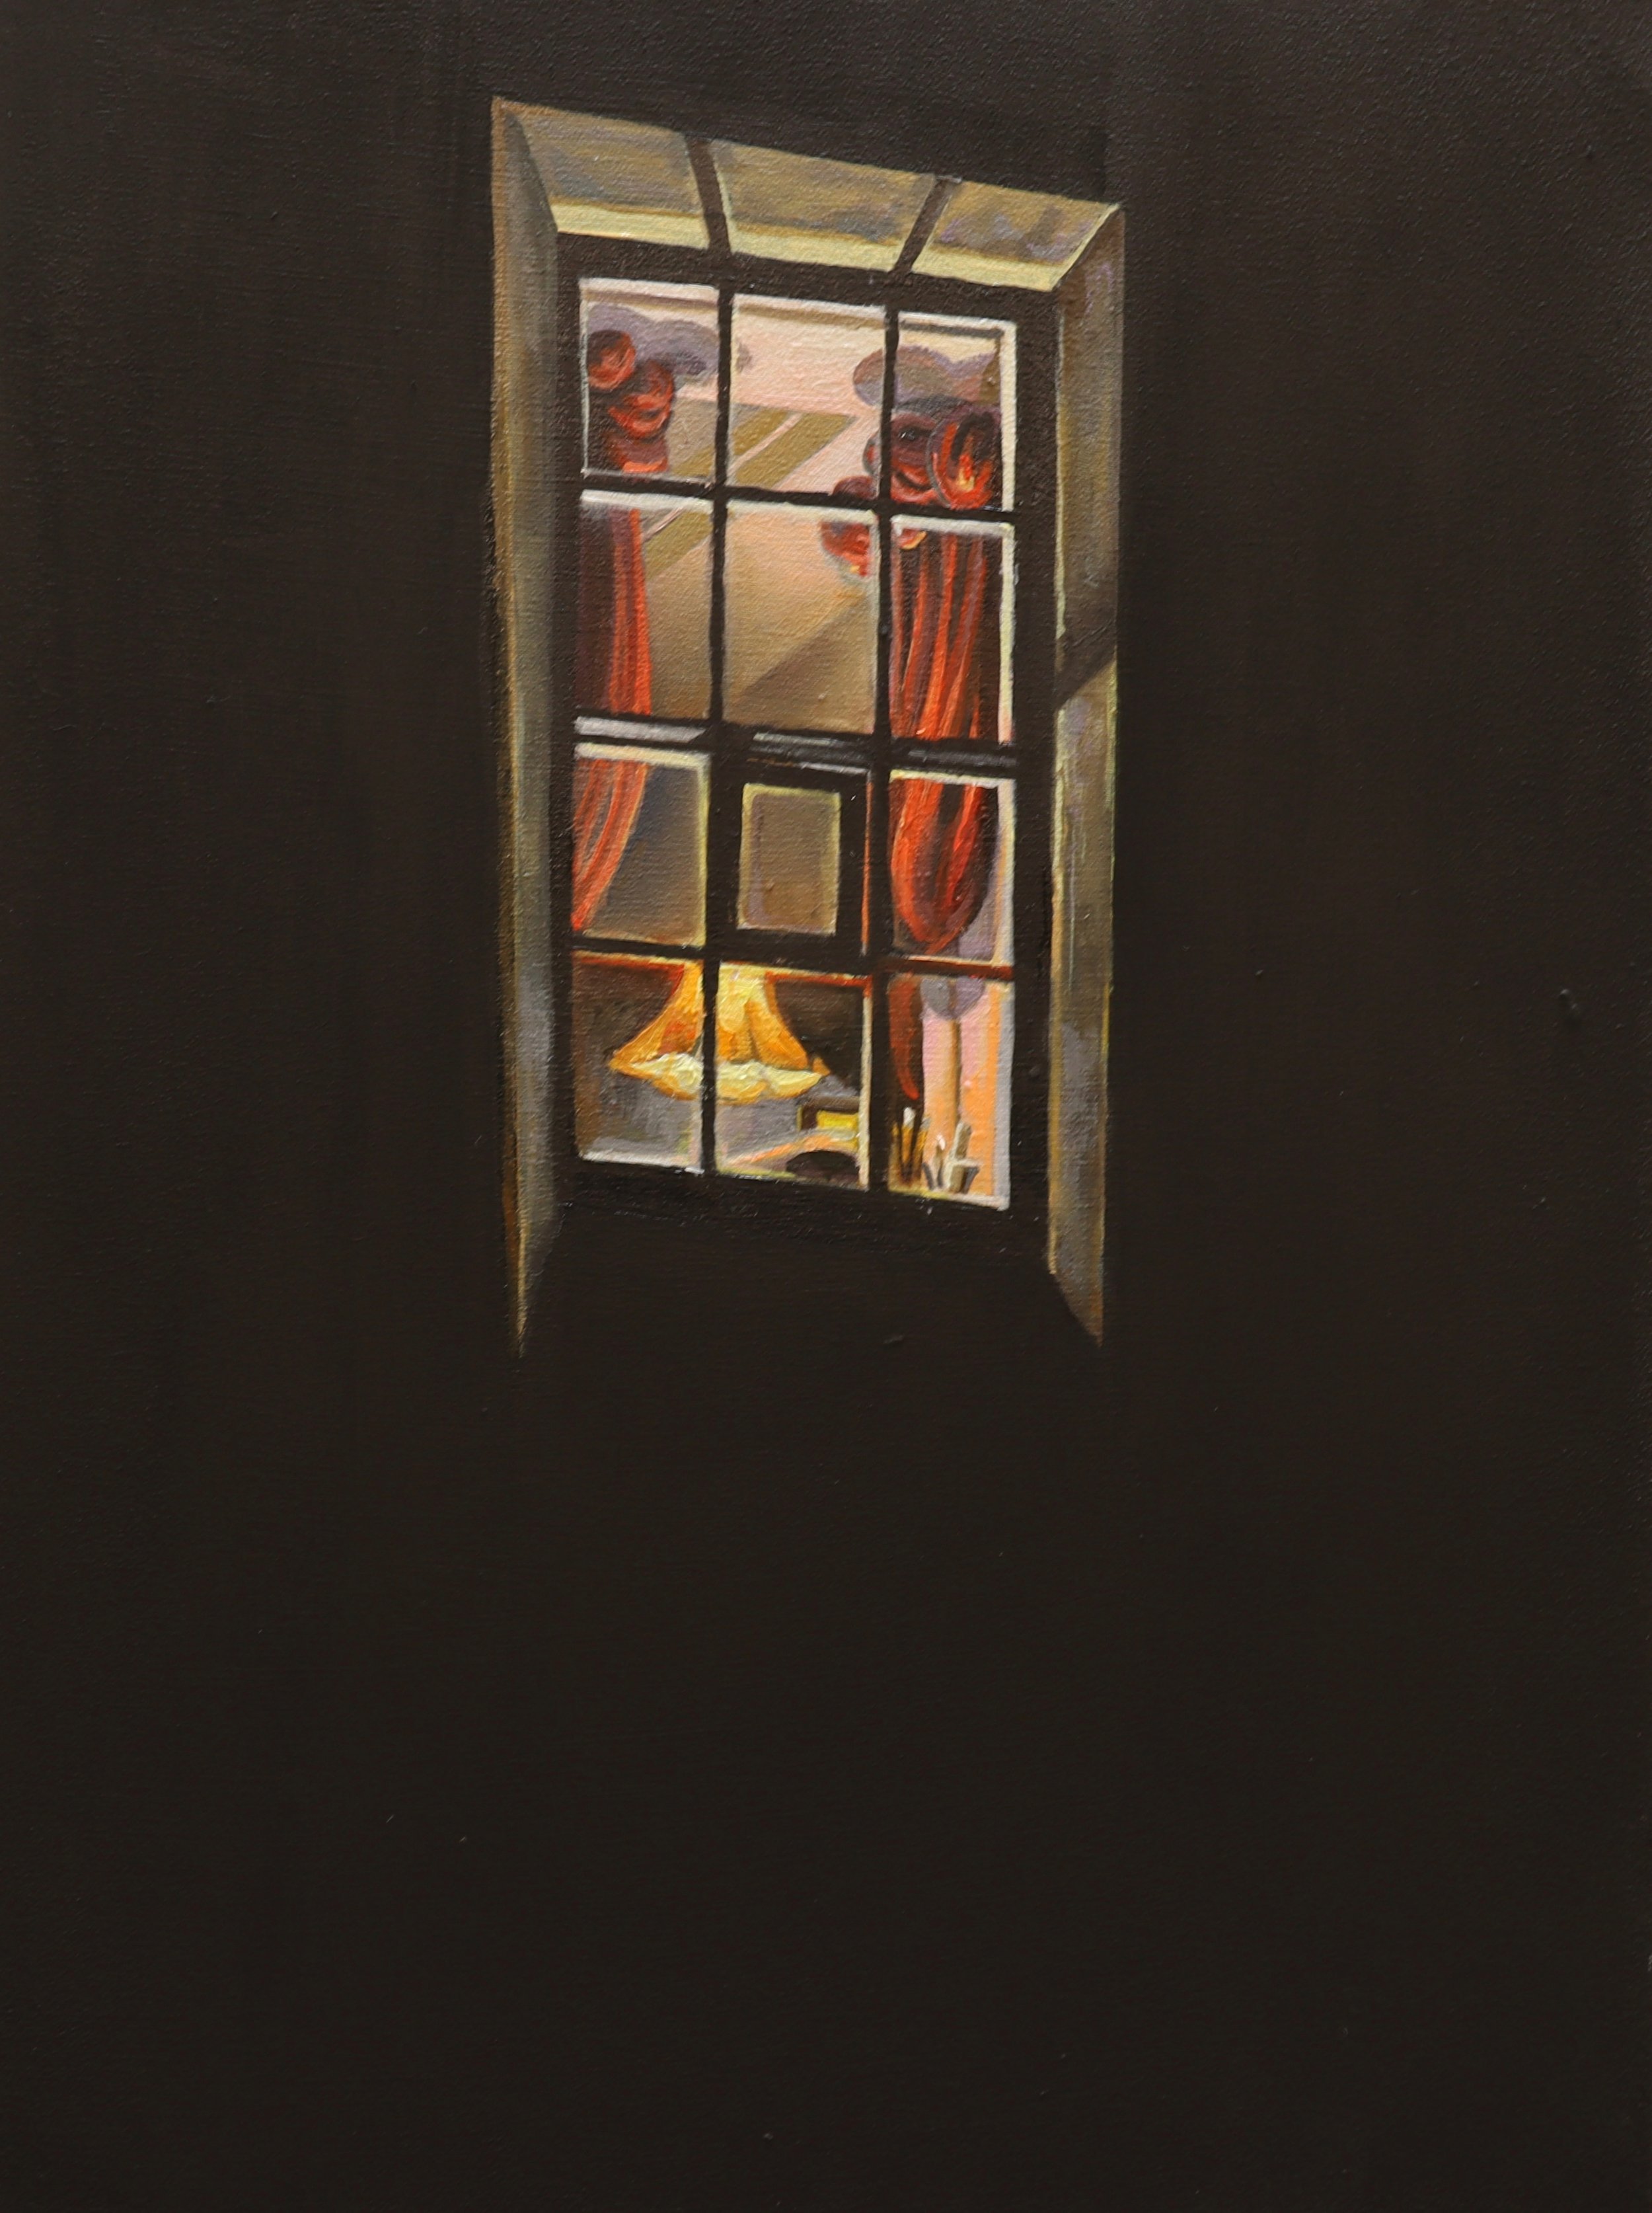  After Hopper's New York, 01.02.2023, 2023, oil on wood panel, 9 x 12 inches 